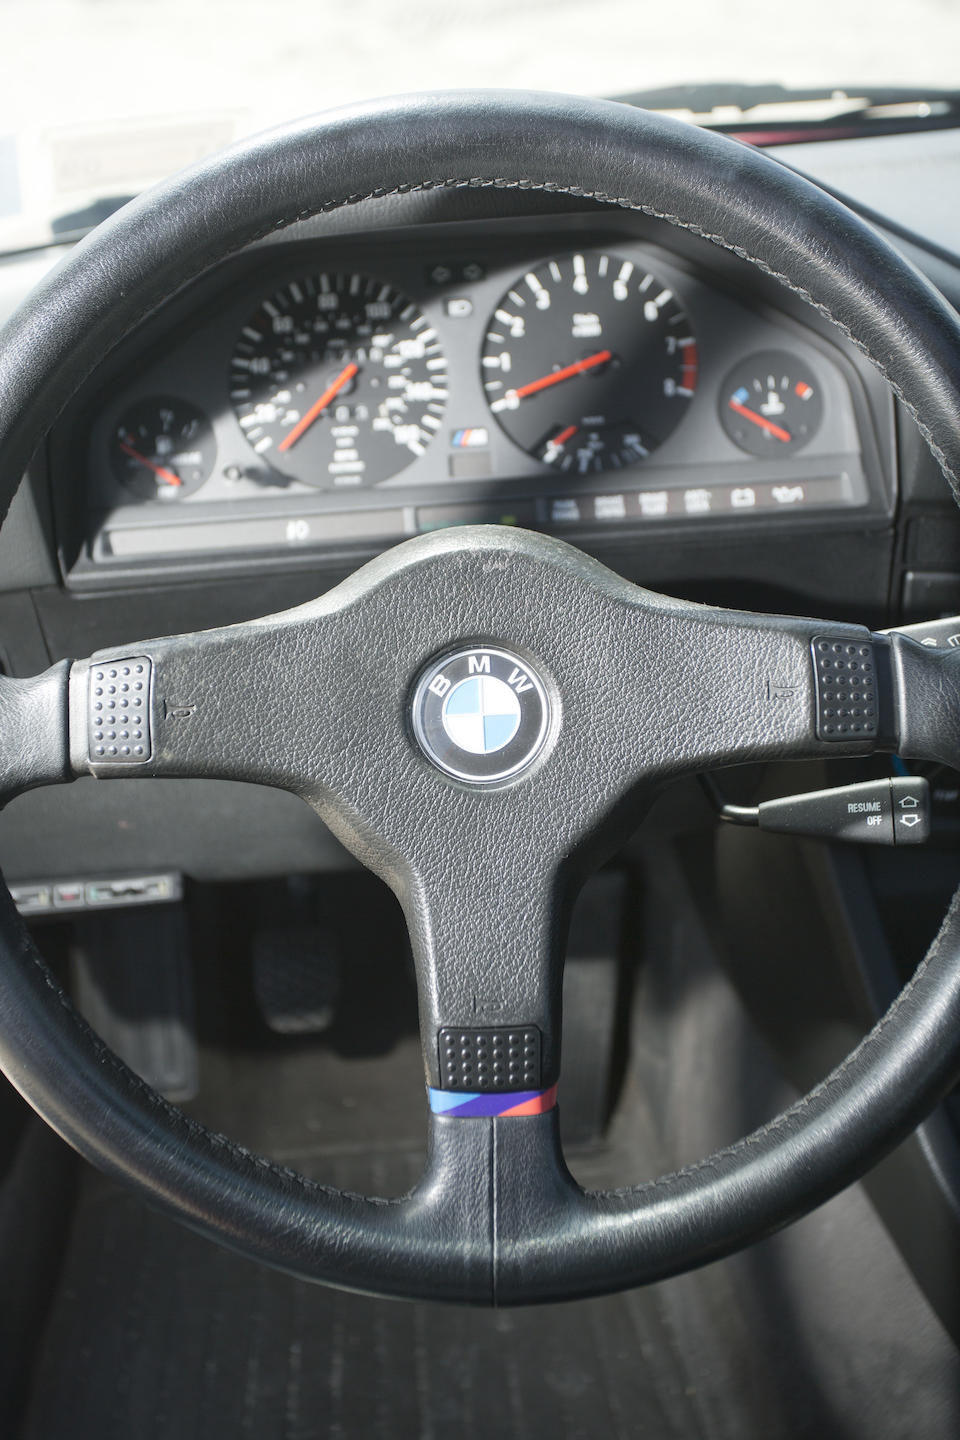 1989 BMW M3 COUPE  Chassis no. WBSAK0300K2198332